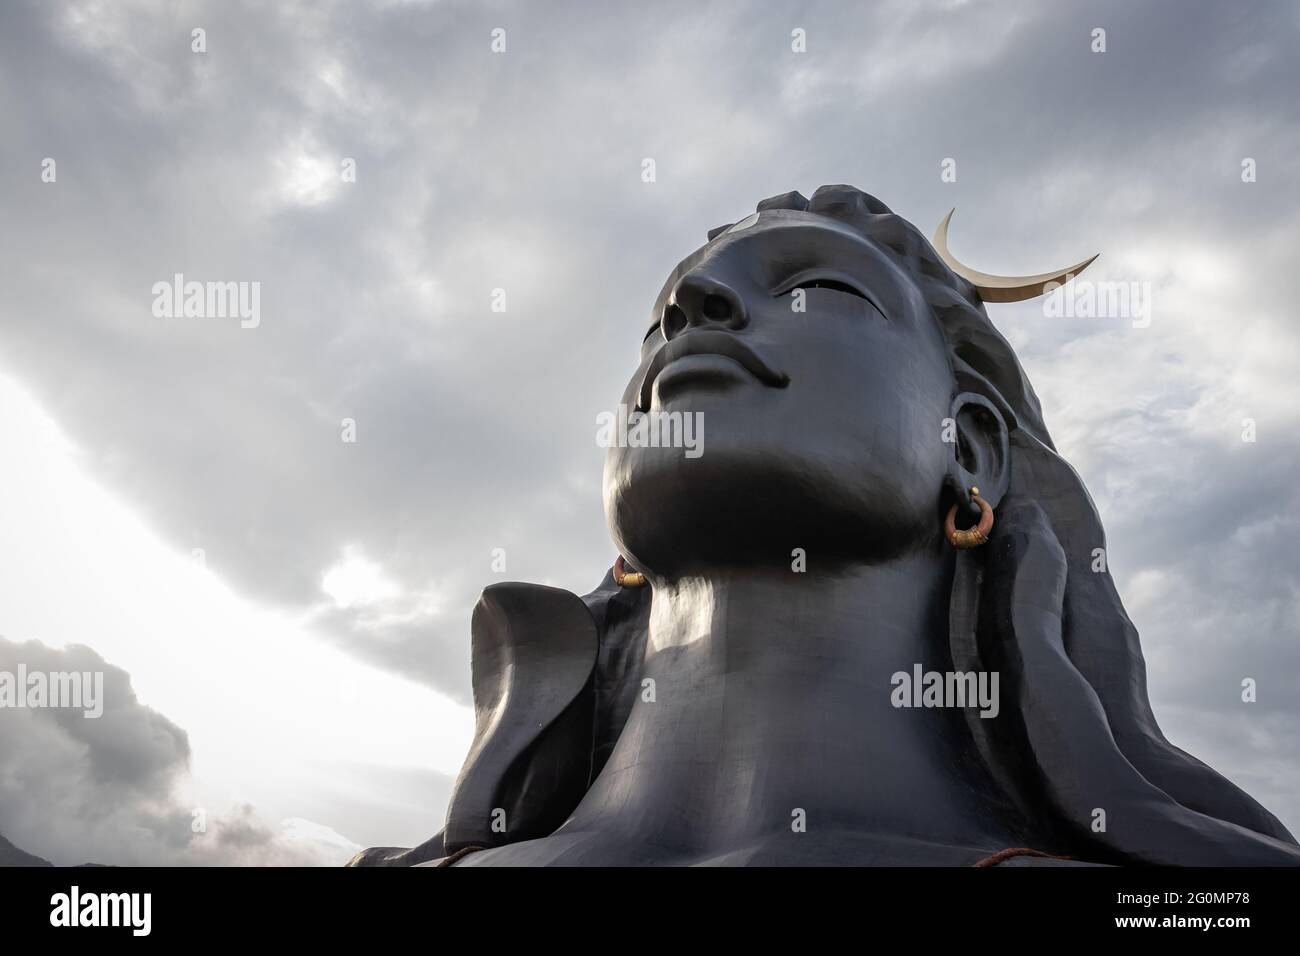 422 Lord Shiva Images HD Wallpaper Download Best Collection 